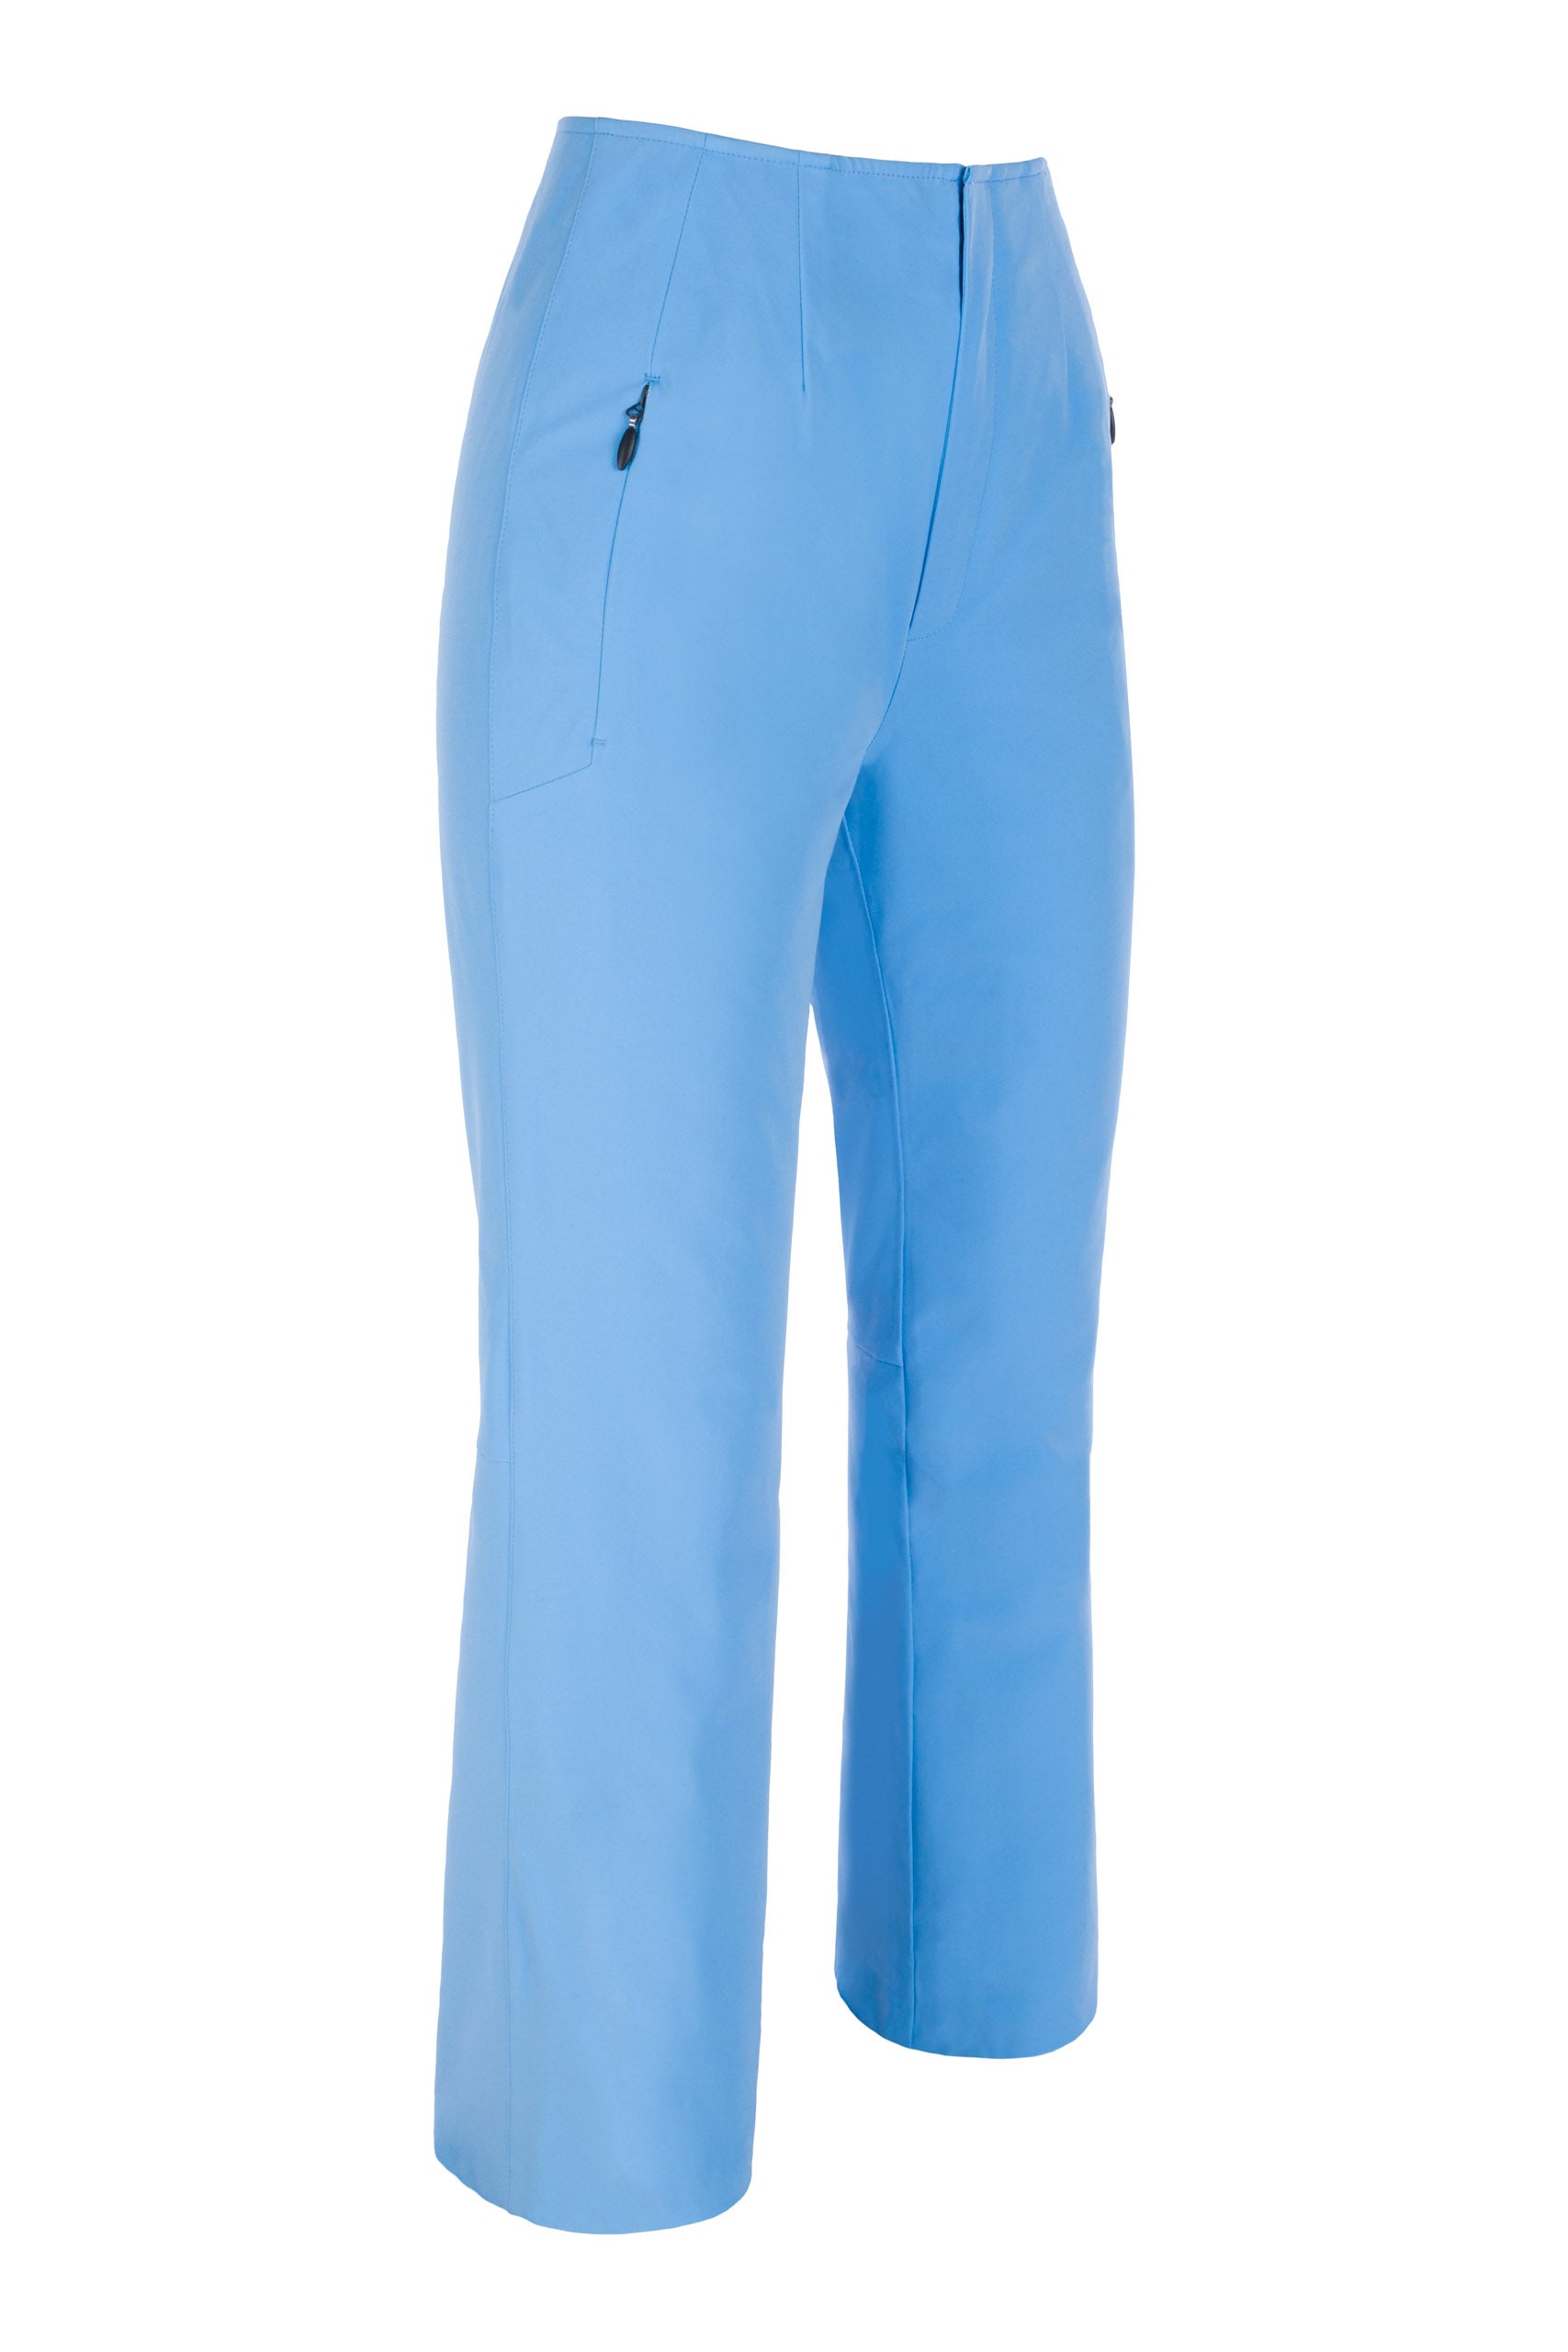 The North Face Freedom Insulated Pant - Ski Trousers Girls | Buy online |  Alpinetrek.co.uk